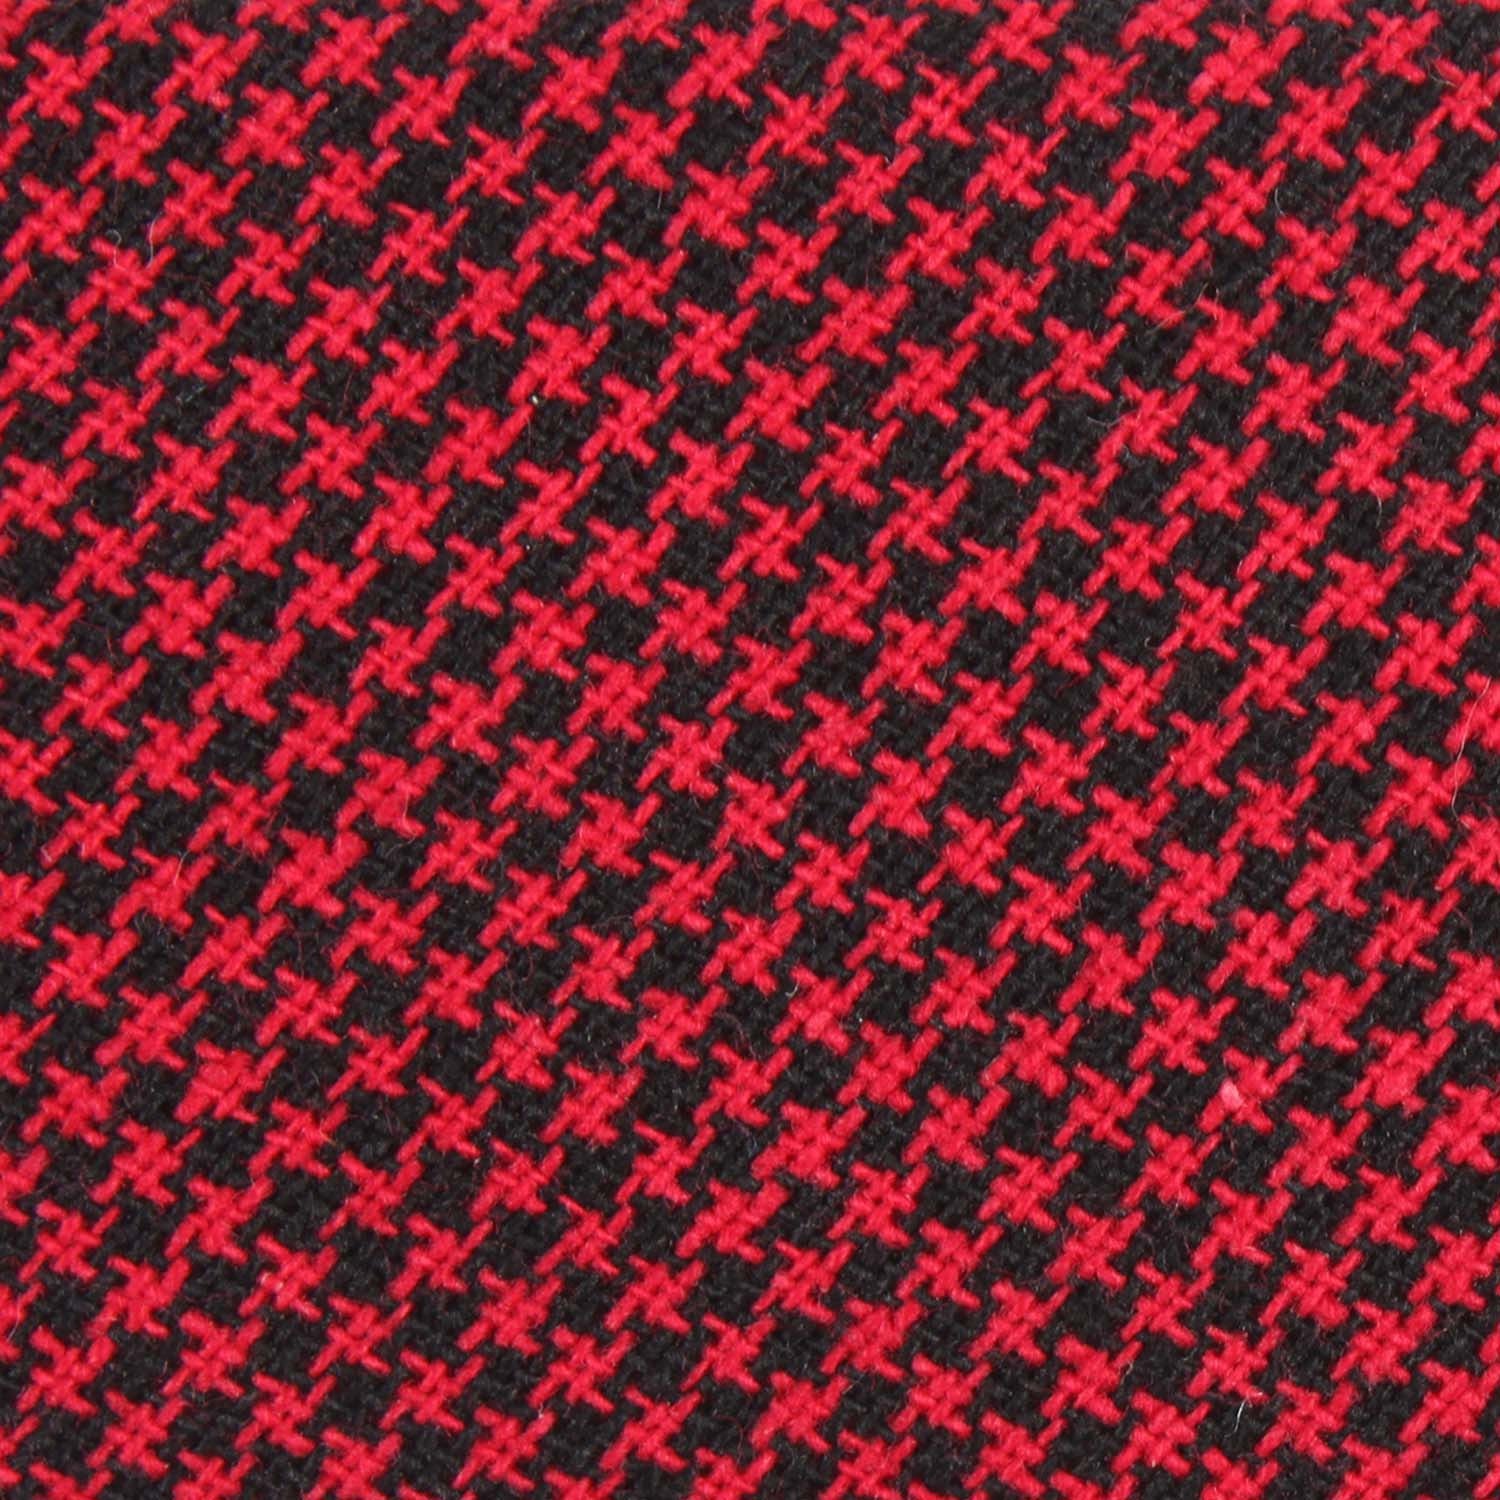 Red & Black Houndstooth Cotton Fabric Skinny Tie C165